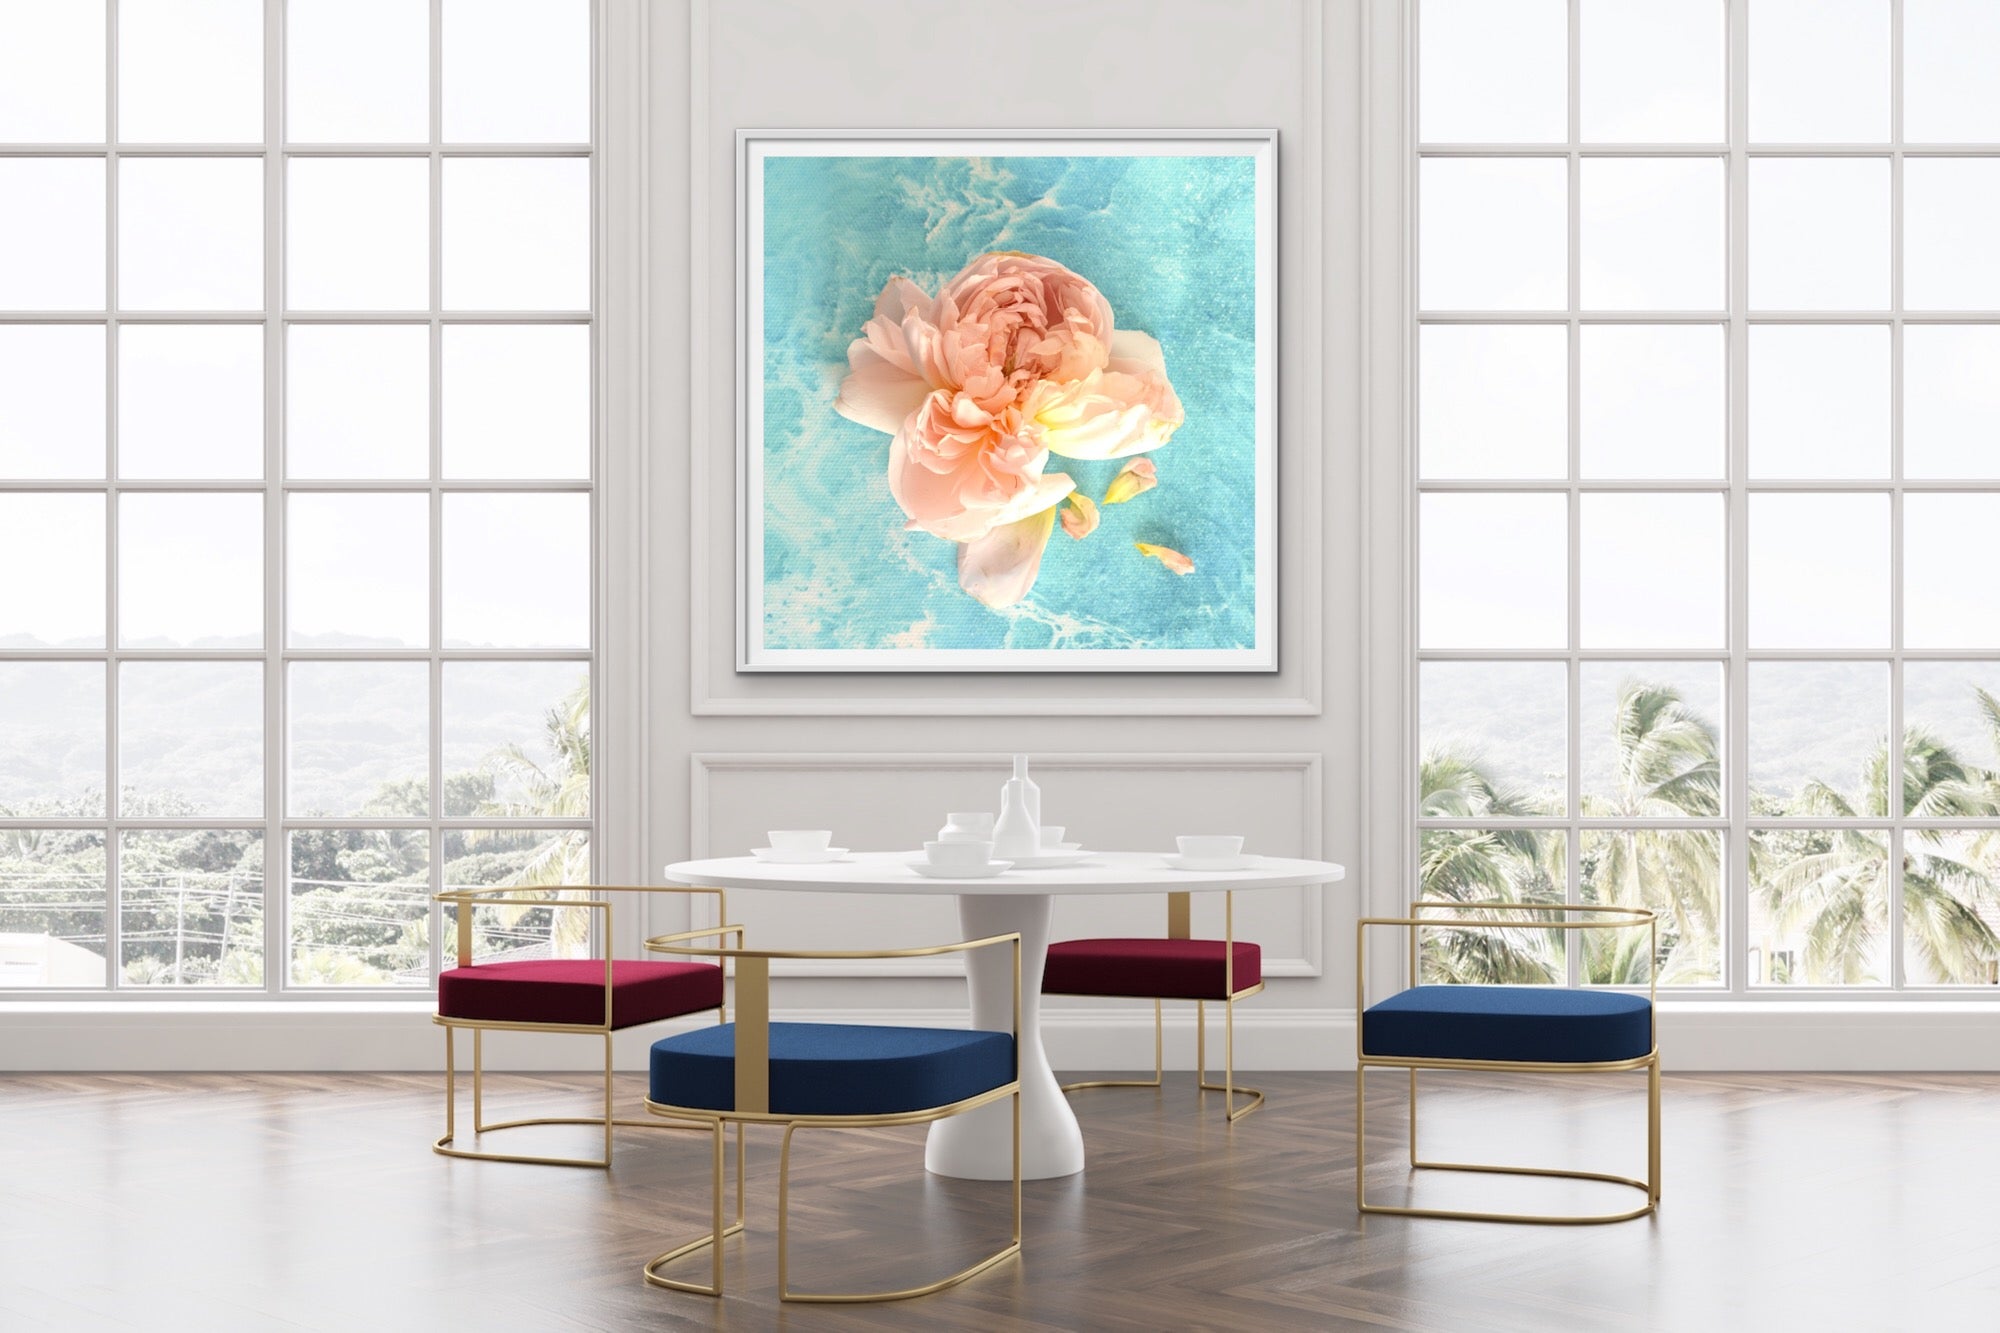 Abstract Floralscape. Pink. Flower Power 3. Art Print. Antuanelle Square. Vibrant Pink and Blue Floral Artwork. Limited Edition Print